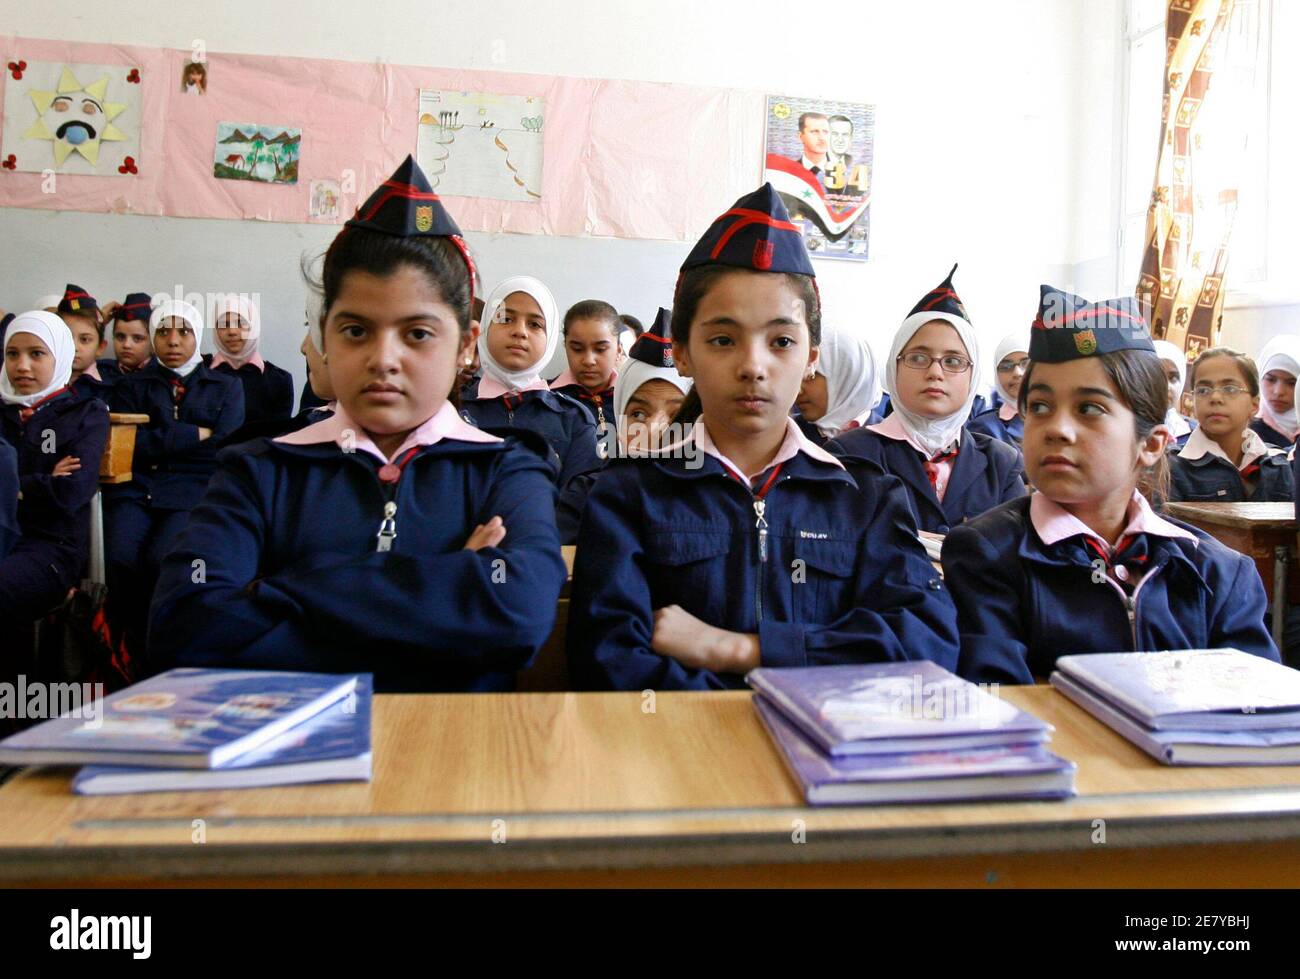 Iraqi refugee students wait in their classroom with Syrian students before  UNHCR Arab world good will ambassador and renowned Arab comedian Adel Imam  arrived at their school in the Damascus suburb of